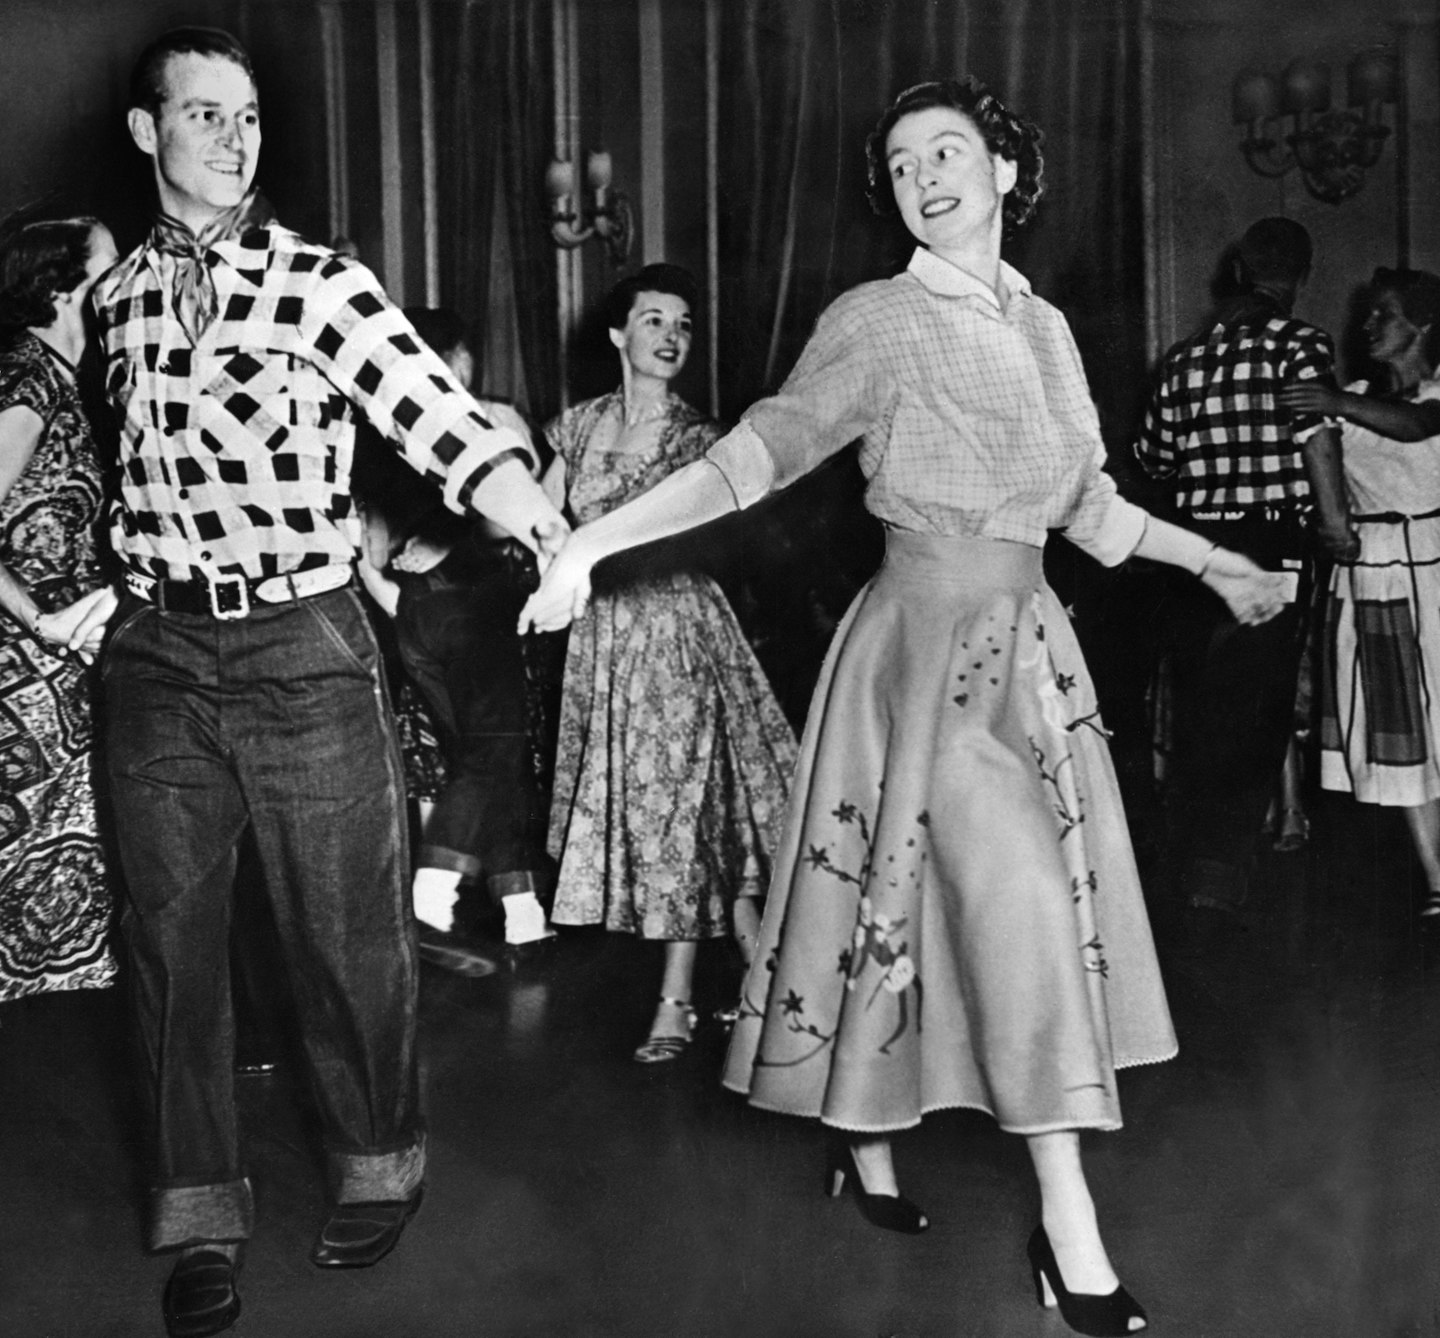 Prince Philip and the Queen line dancing